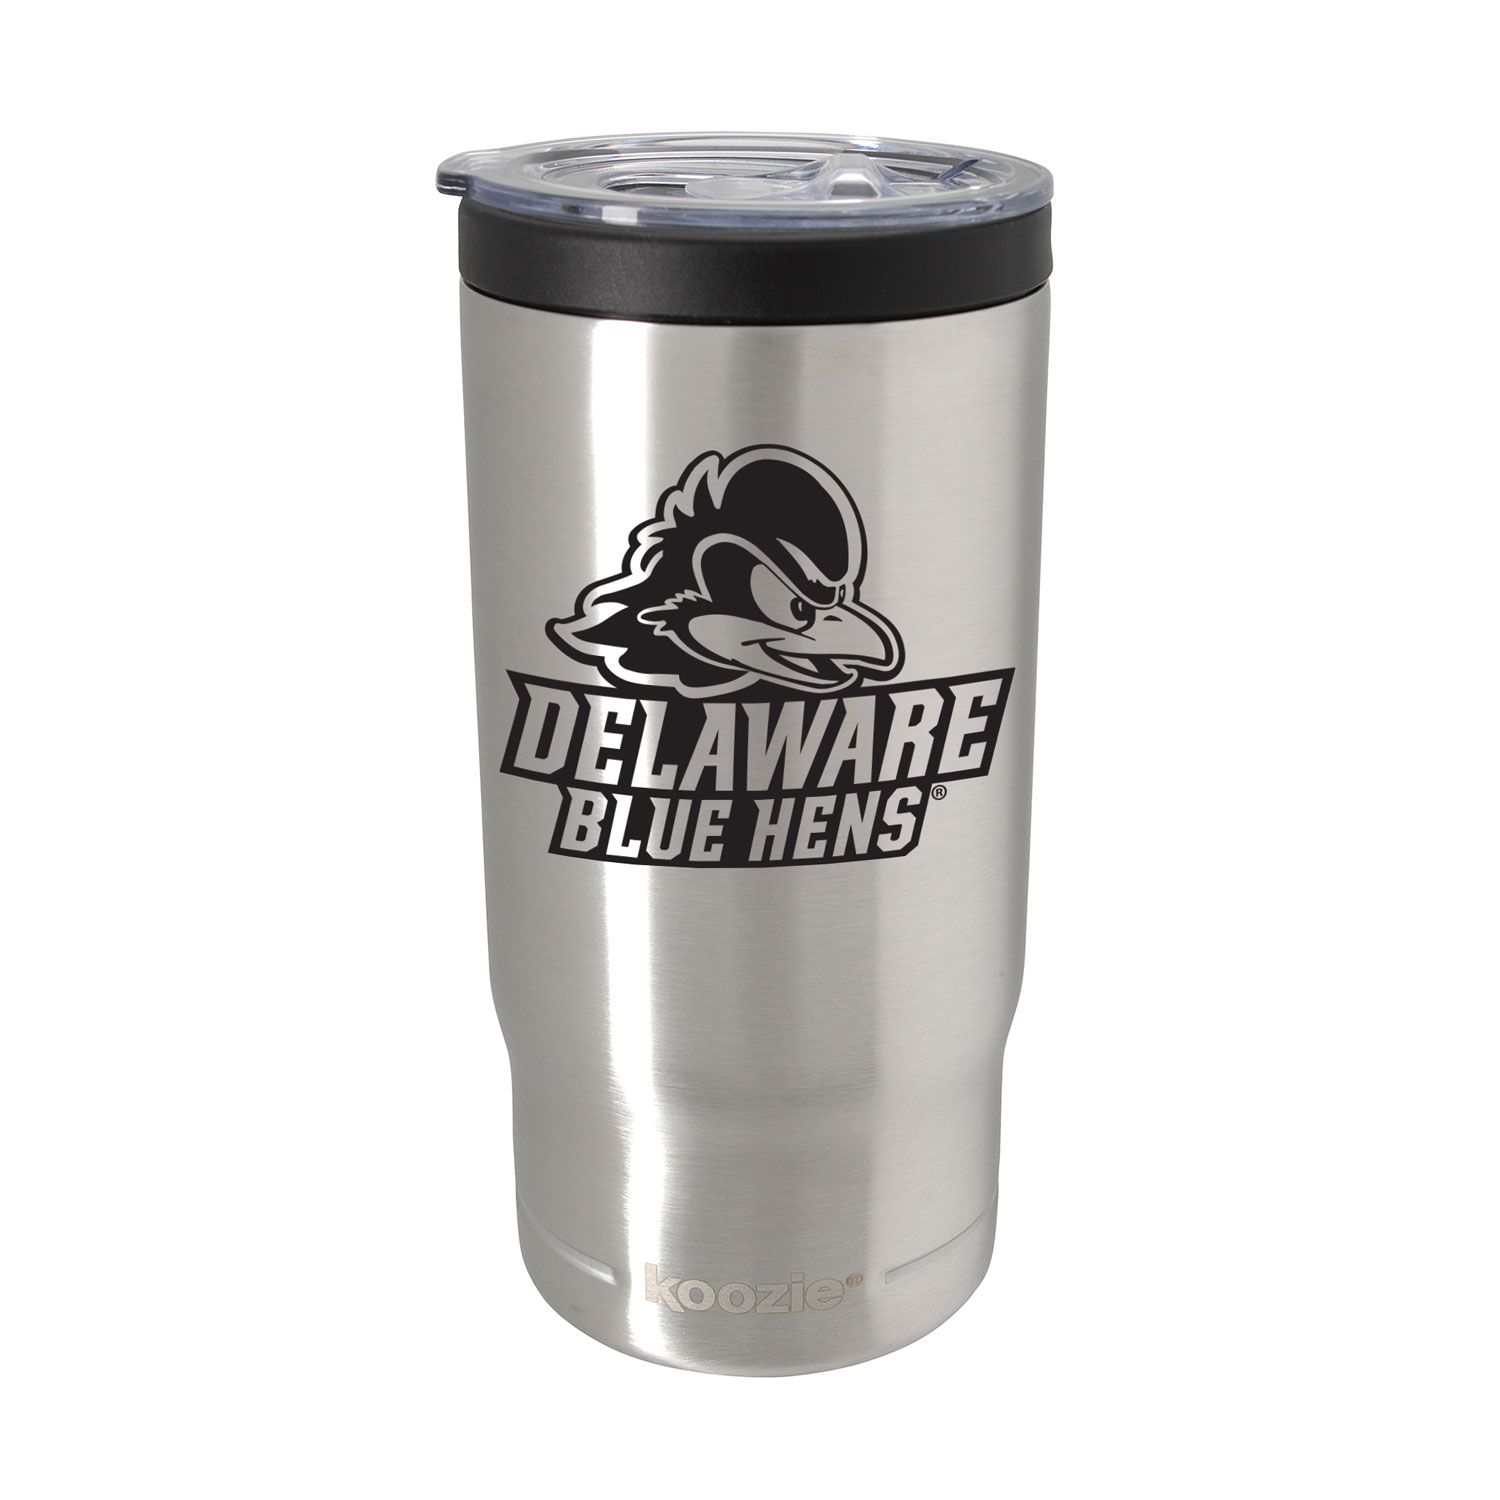 https://www.national5and10.com/wp-content/uploads/2019/07/University-of-Delaware-Insulated-Koozie-Travel-Tumbler-silver.jpg